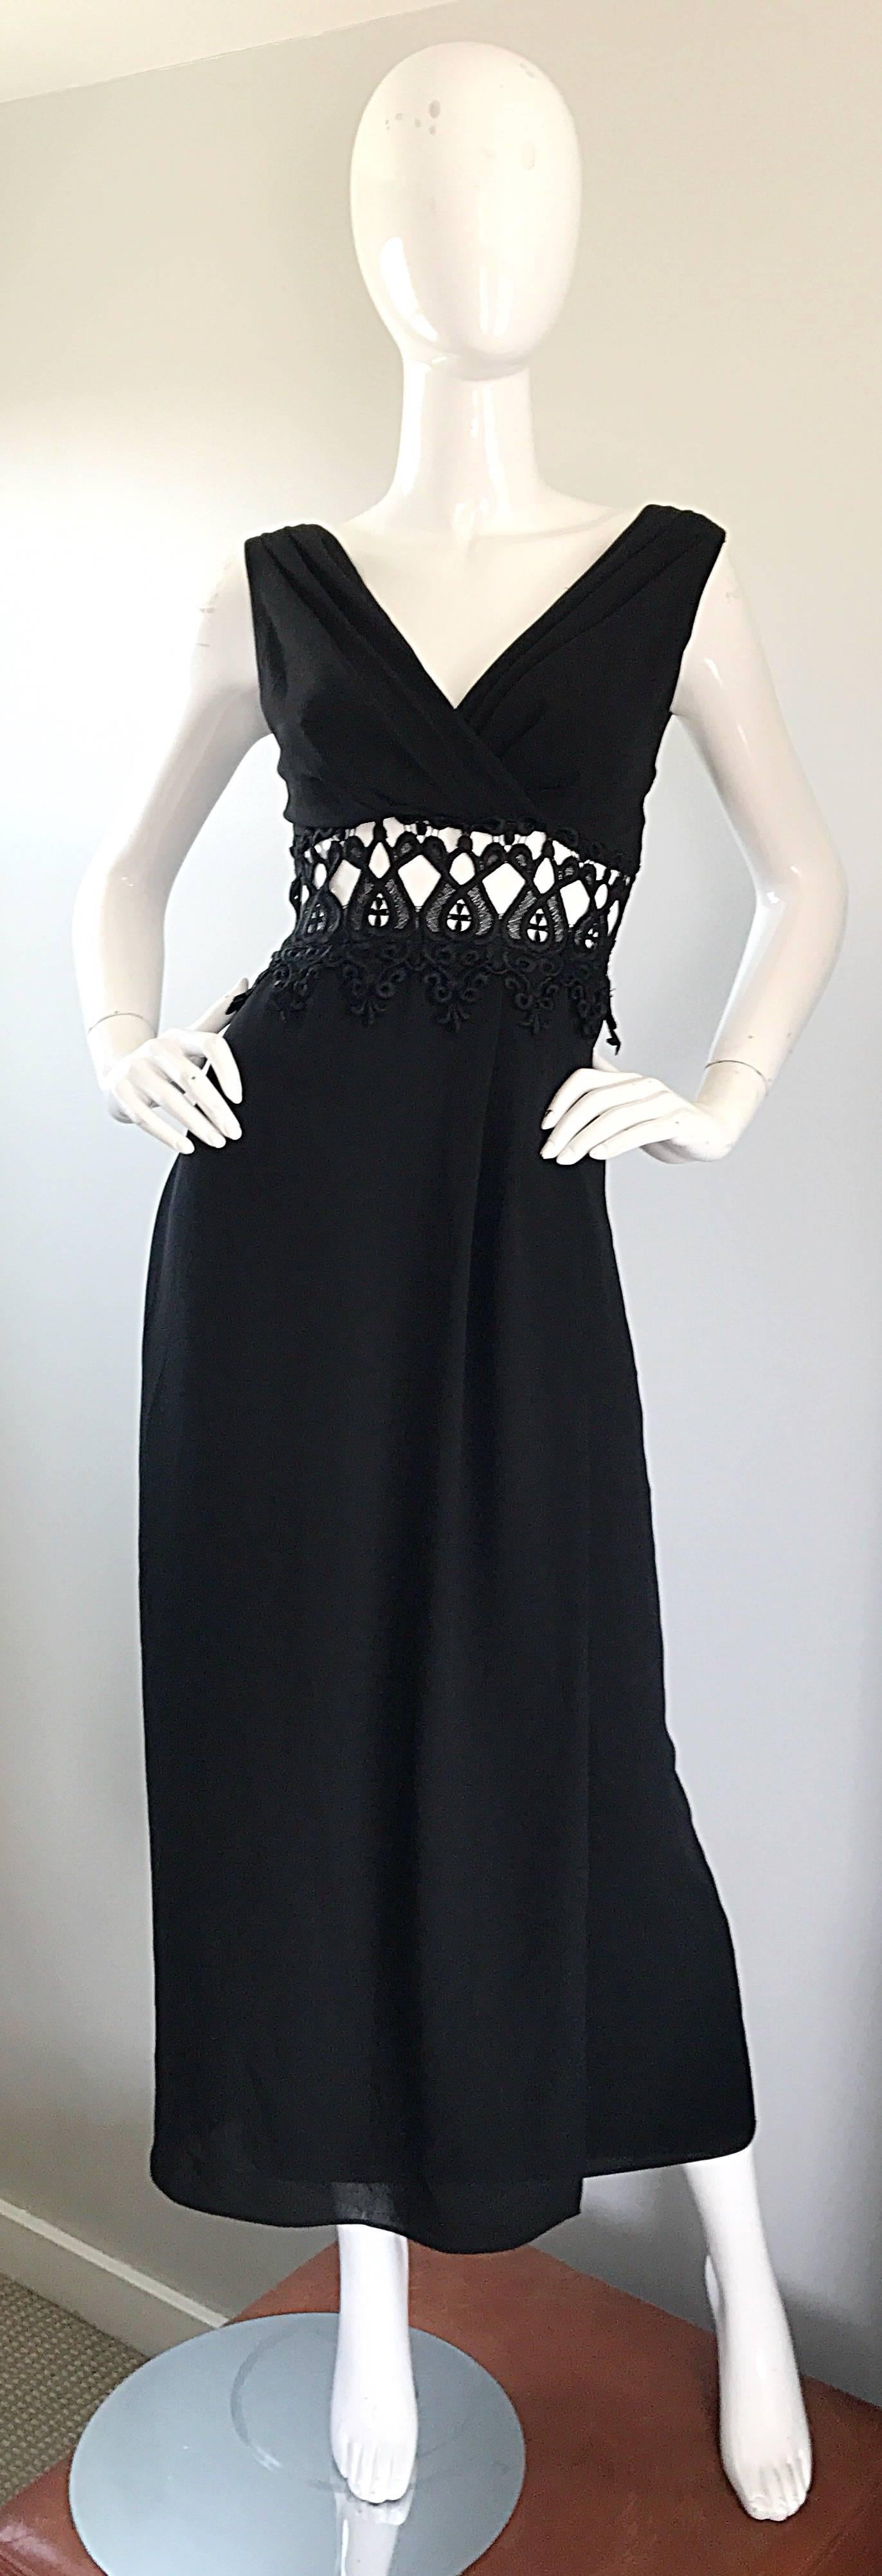 Sexy, gorgeous and sophisticated black cut-out waist full length crepe rayon maxi dress! Features a flattering draped bodice, with embroidered cut-out detail under the bust. Skirt portion is full lined. Excellent construction, though no designer